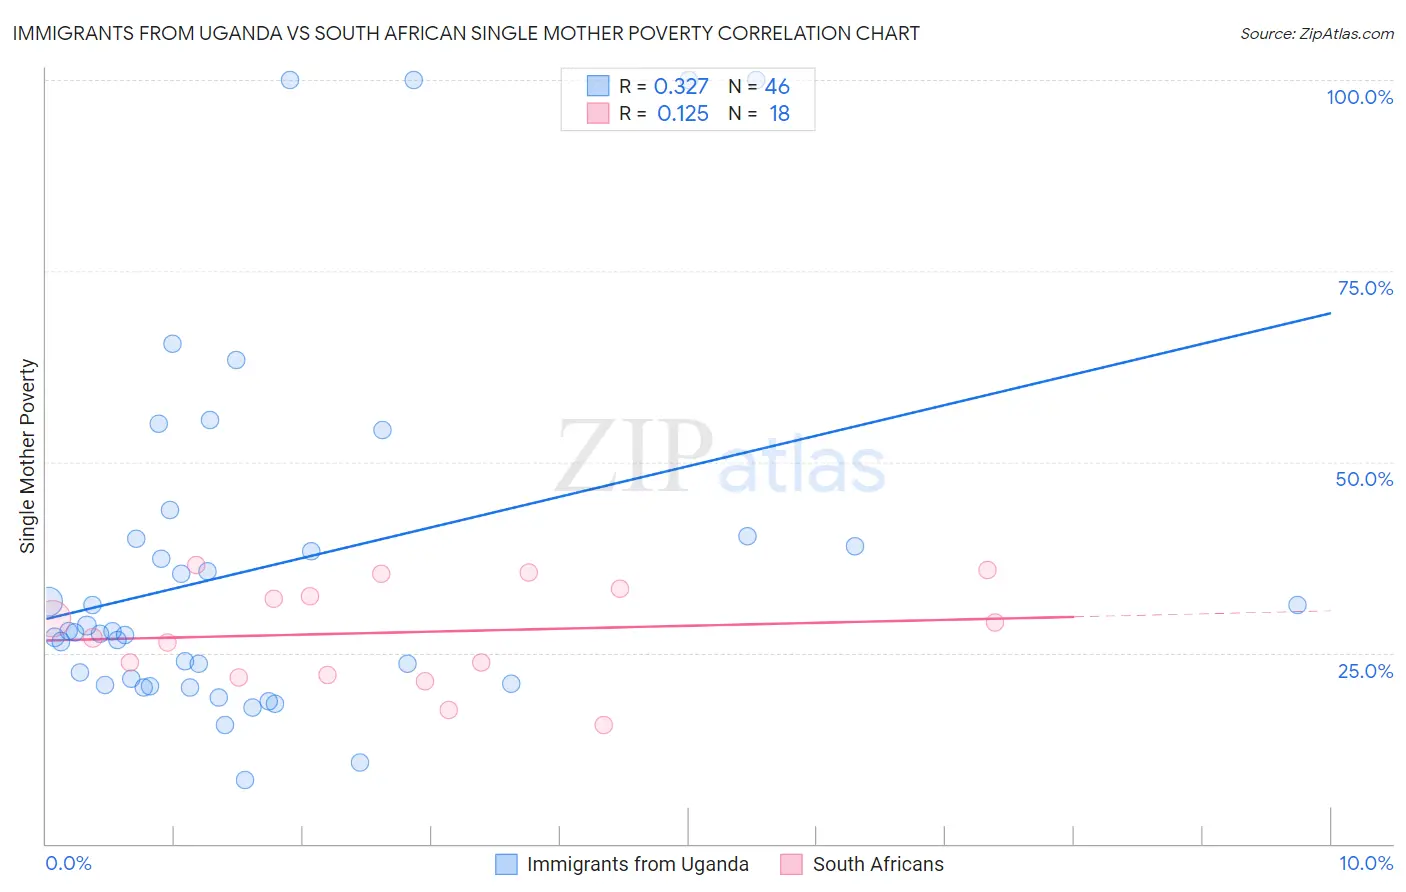 Immigrants from Uganda vs South African Single Mother Poverty